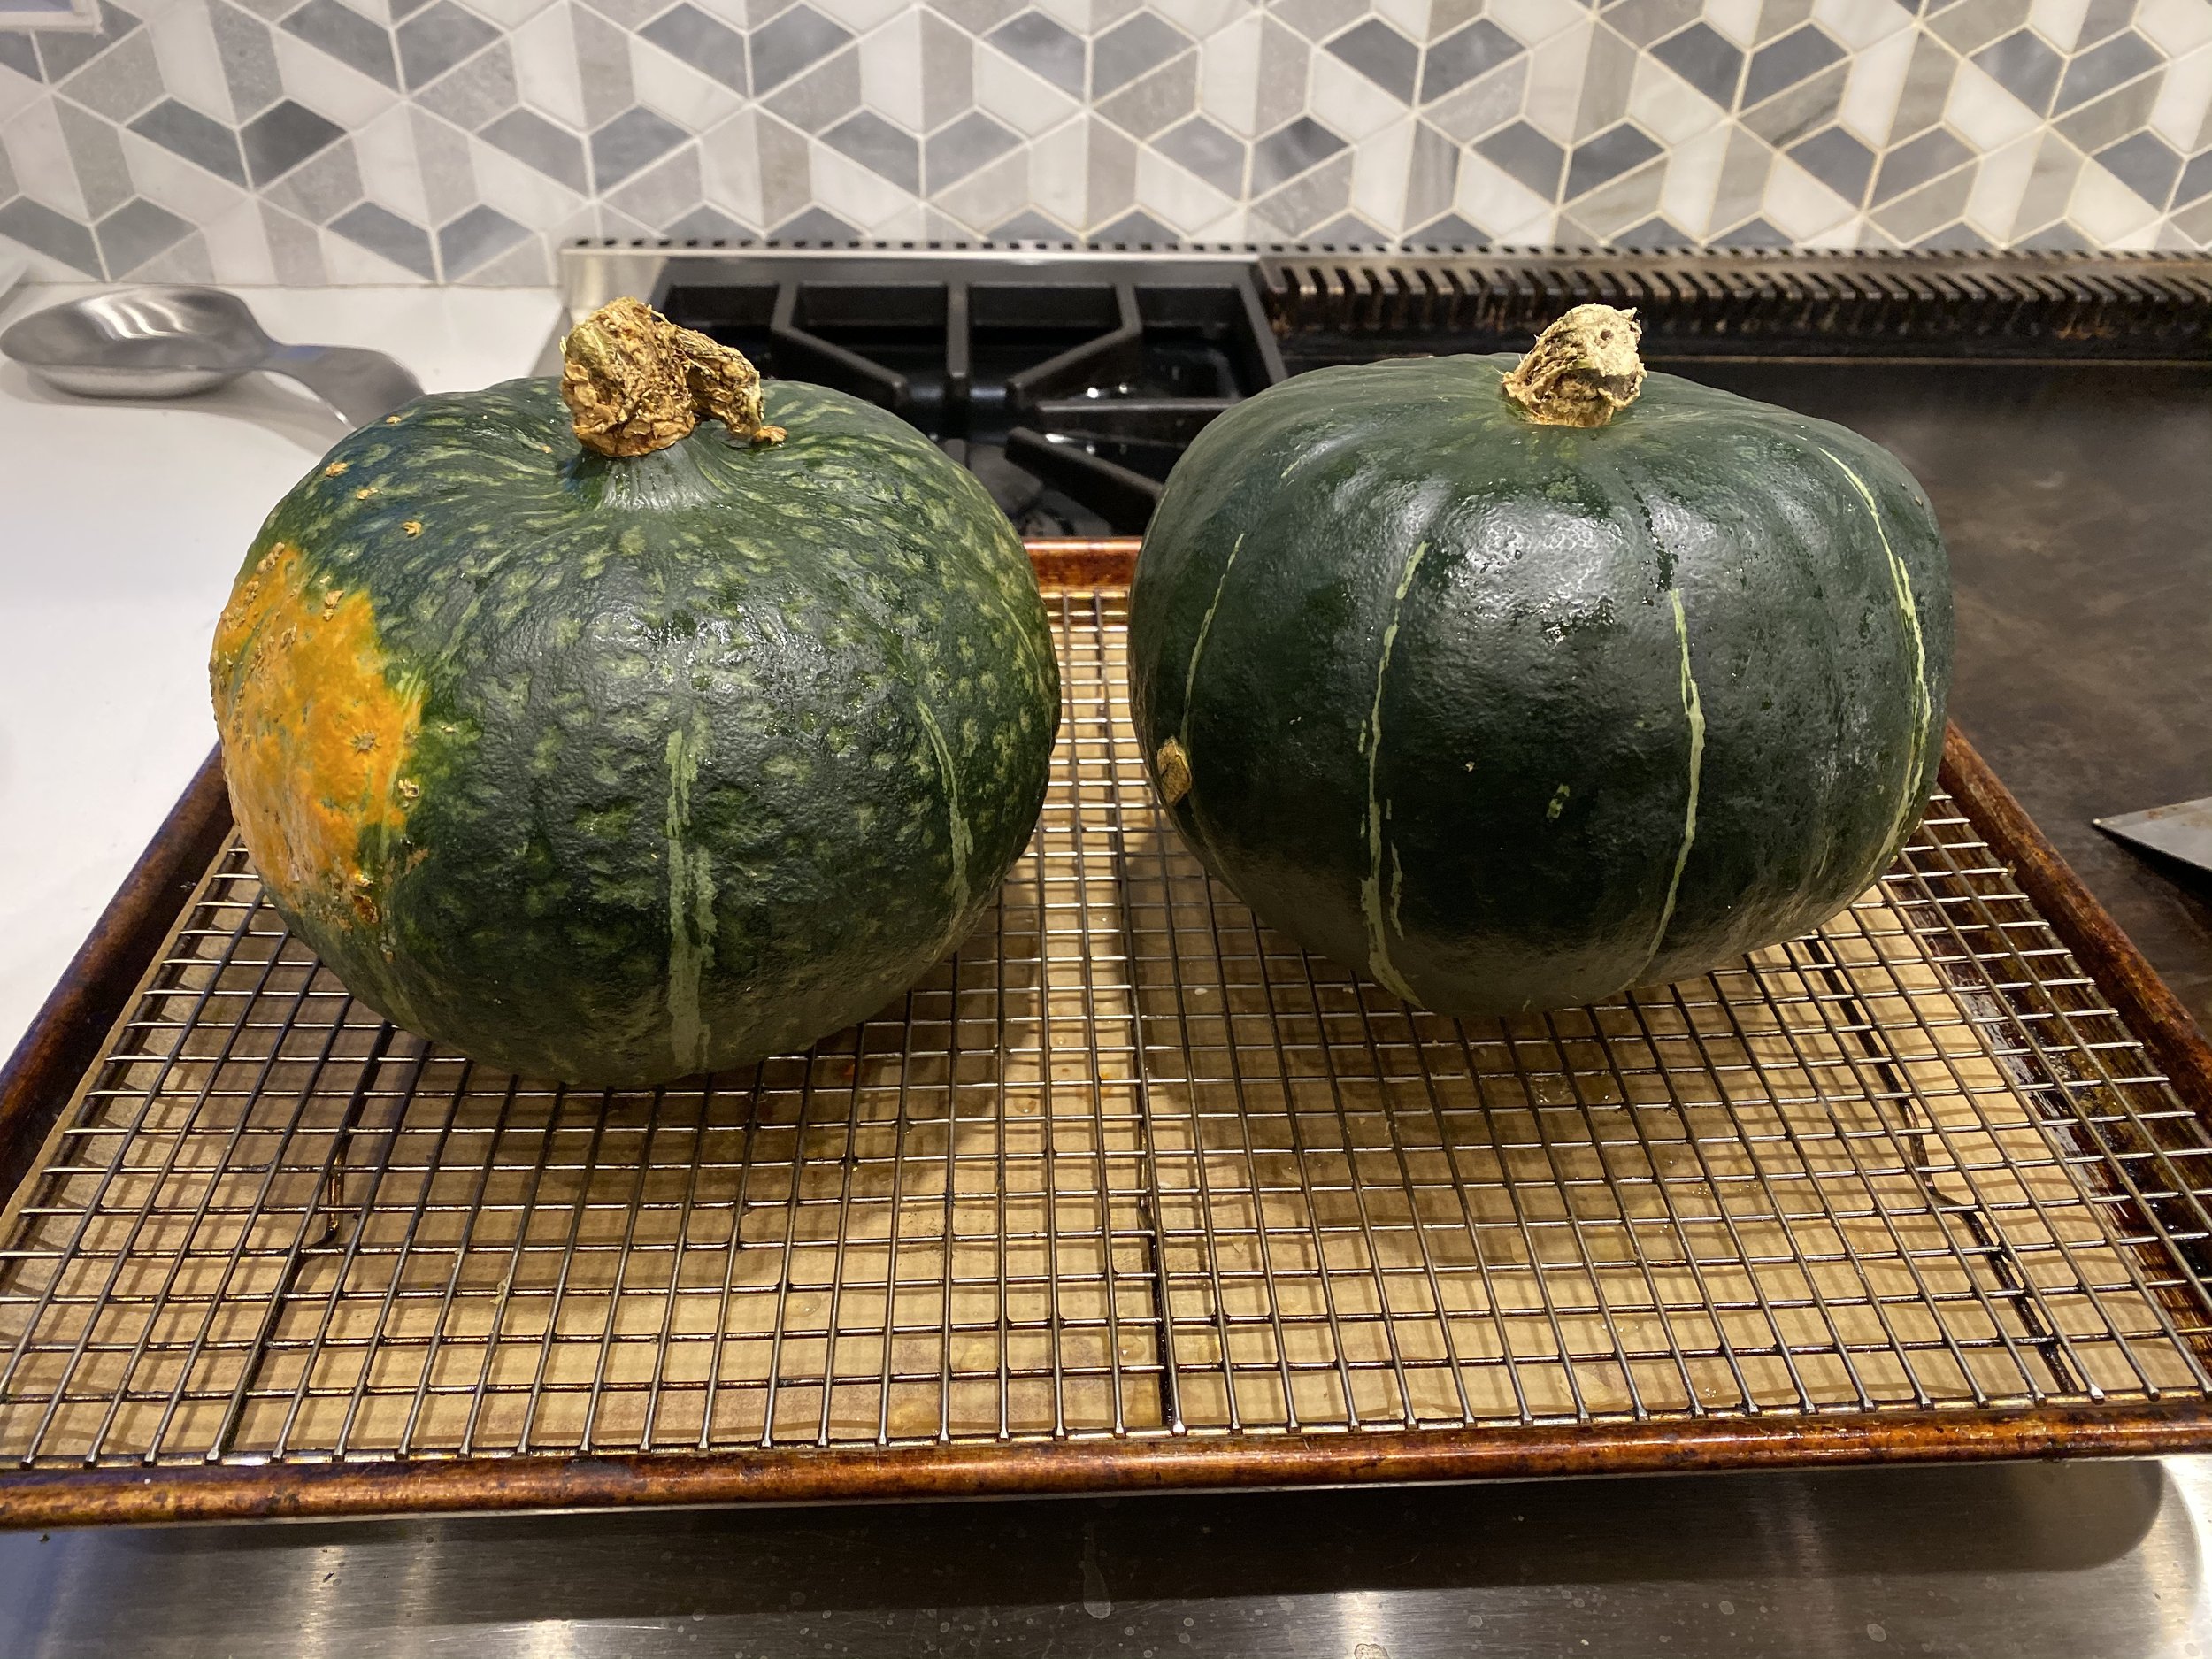 The kabocha (left) is rougher in texture and rounder in shape than the boxier buttercup (right).